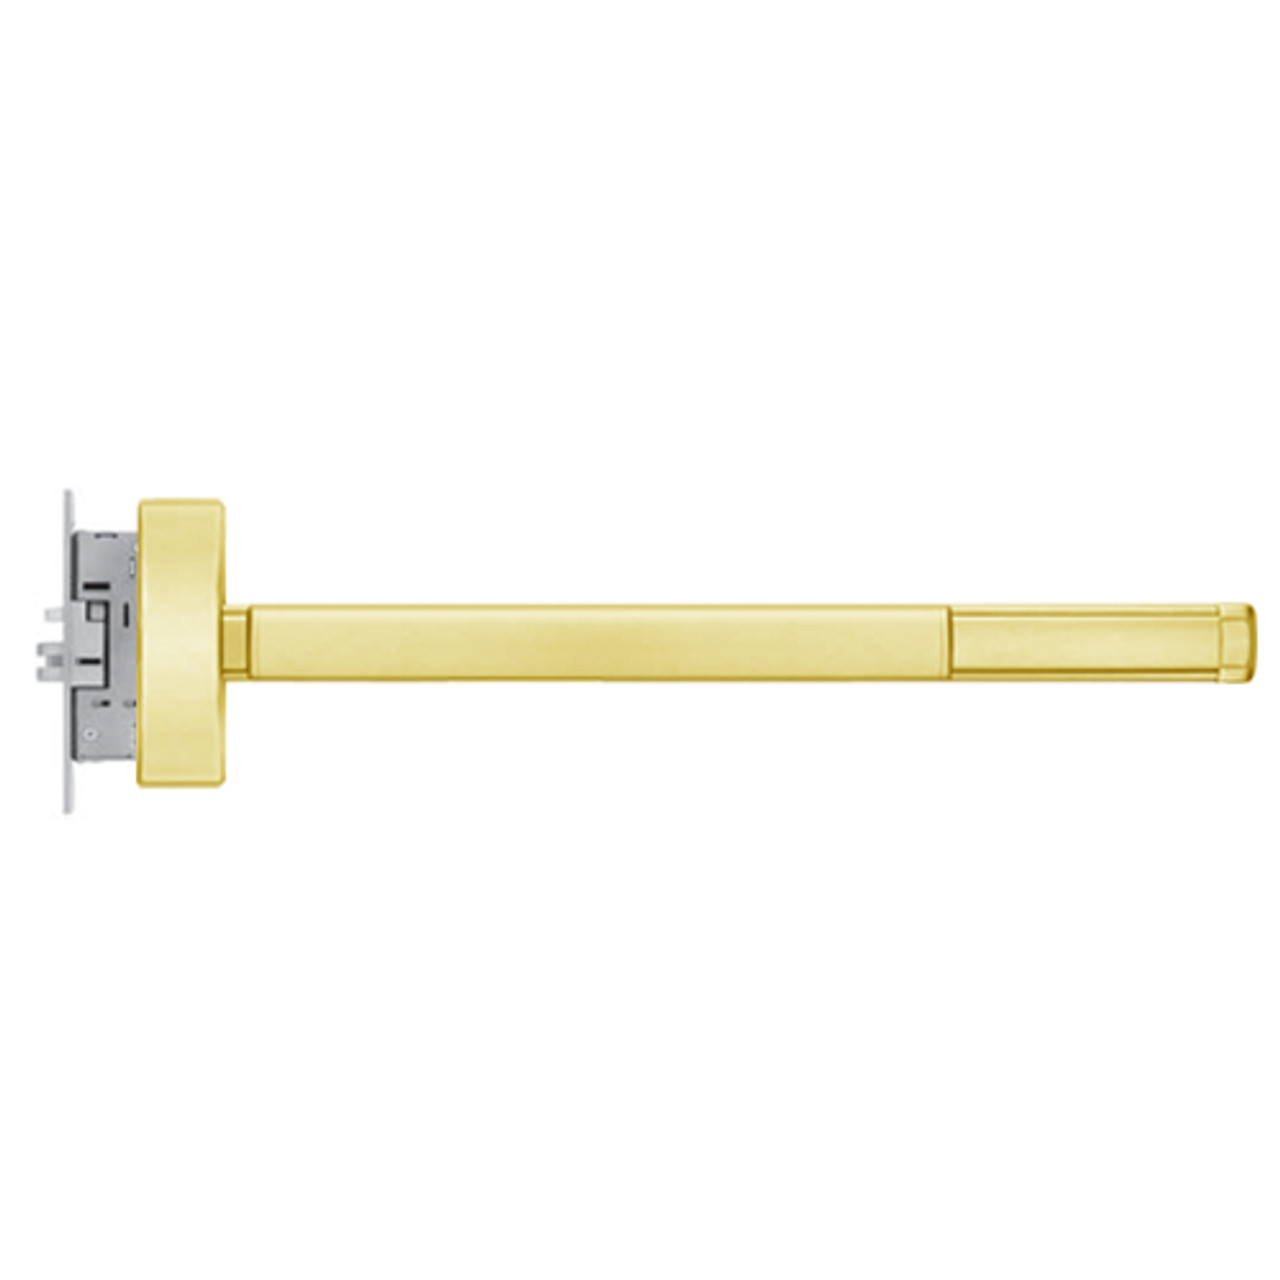 TSFL2302-RHR-605-48 PHI 2300 Series Fire Rated Apex Mortise Exit Device with Touchbar Monitoring Switch Prepped for Dummy Trim in Bright Brass Finish